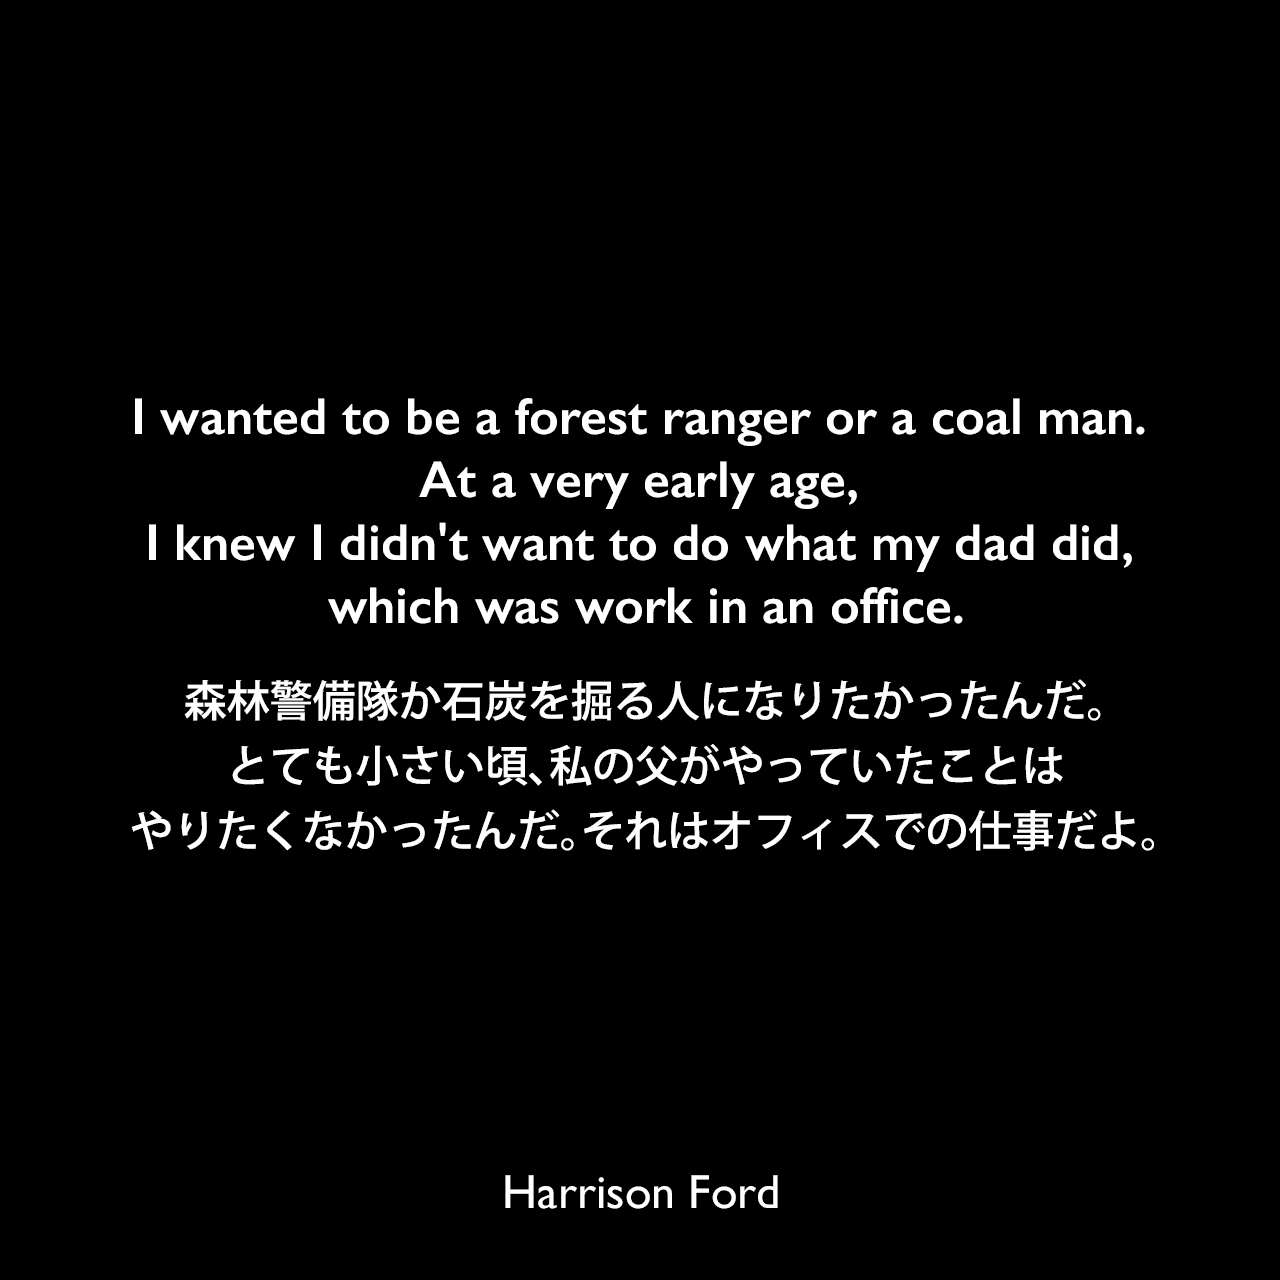 I wanted to be a forest ranger or a coal man. At a very early age, I knew I didn't want to do what my dad did, which was work in an office.森林警備隊か石炭を掘る人になりたかったんだ。とても小さい頃、私の父がやっていたことはやりたくなかったんだ。それはオフィスでの仕事だよ。Harrison Ford